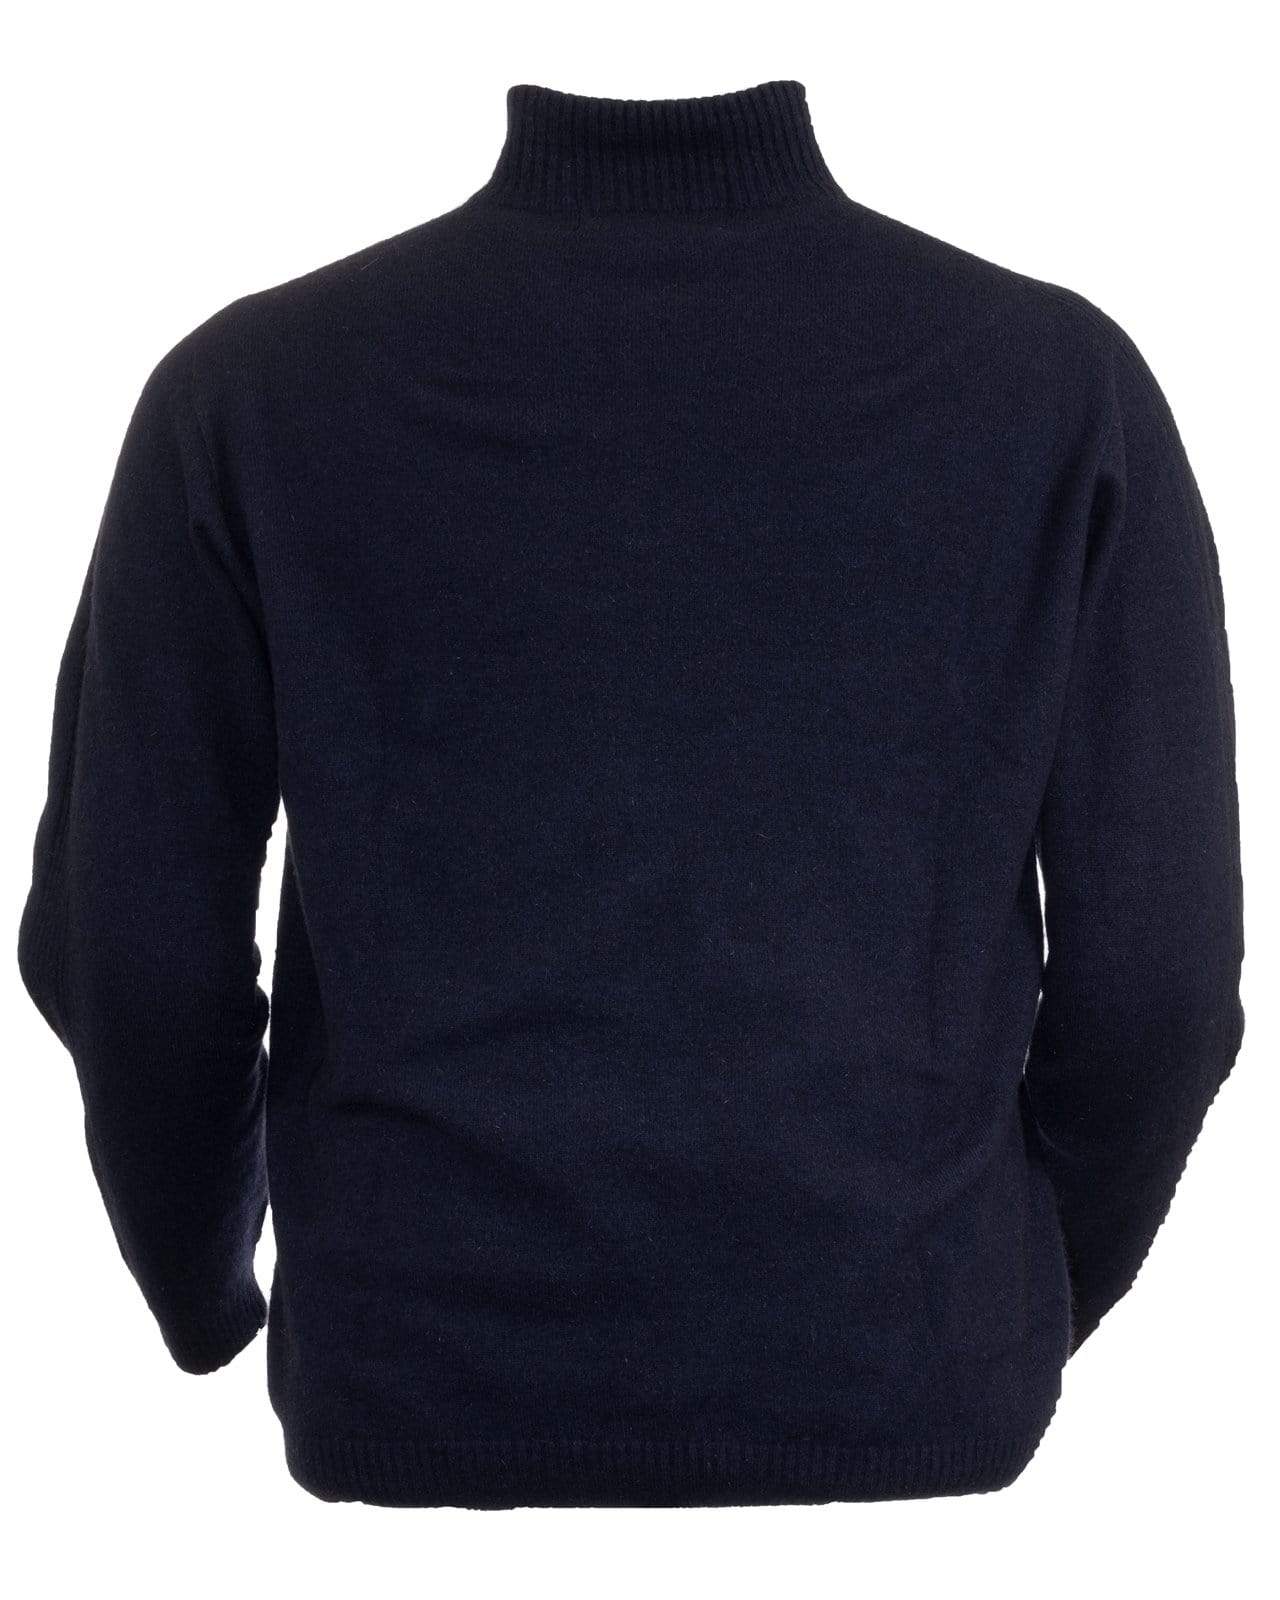 Outback Trading Company Men’s Palmerston Merino Sweater Shirts & Tops